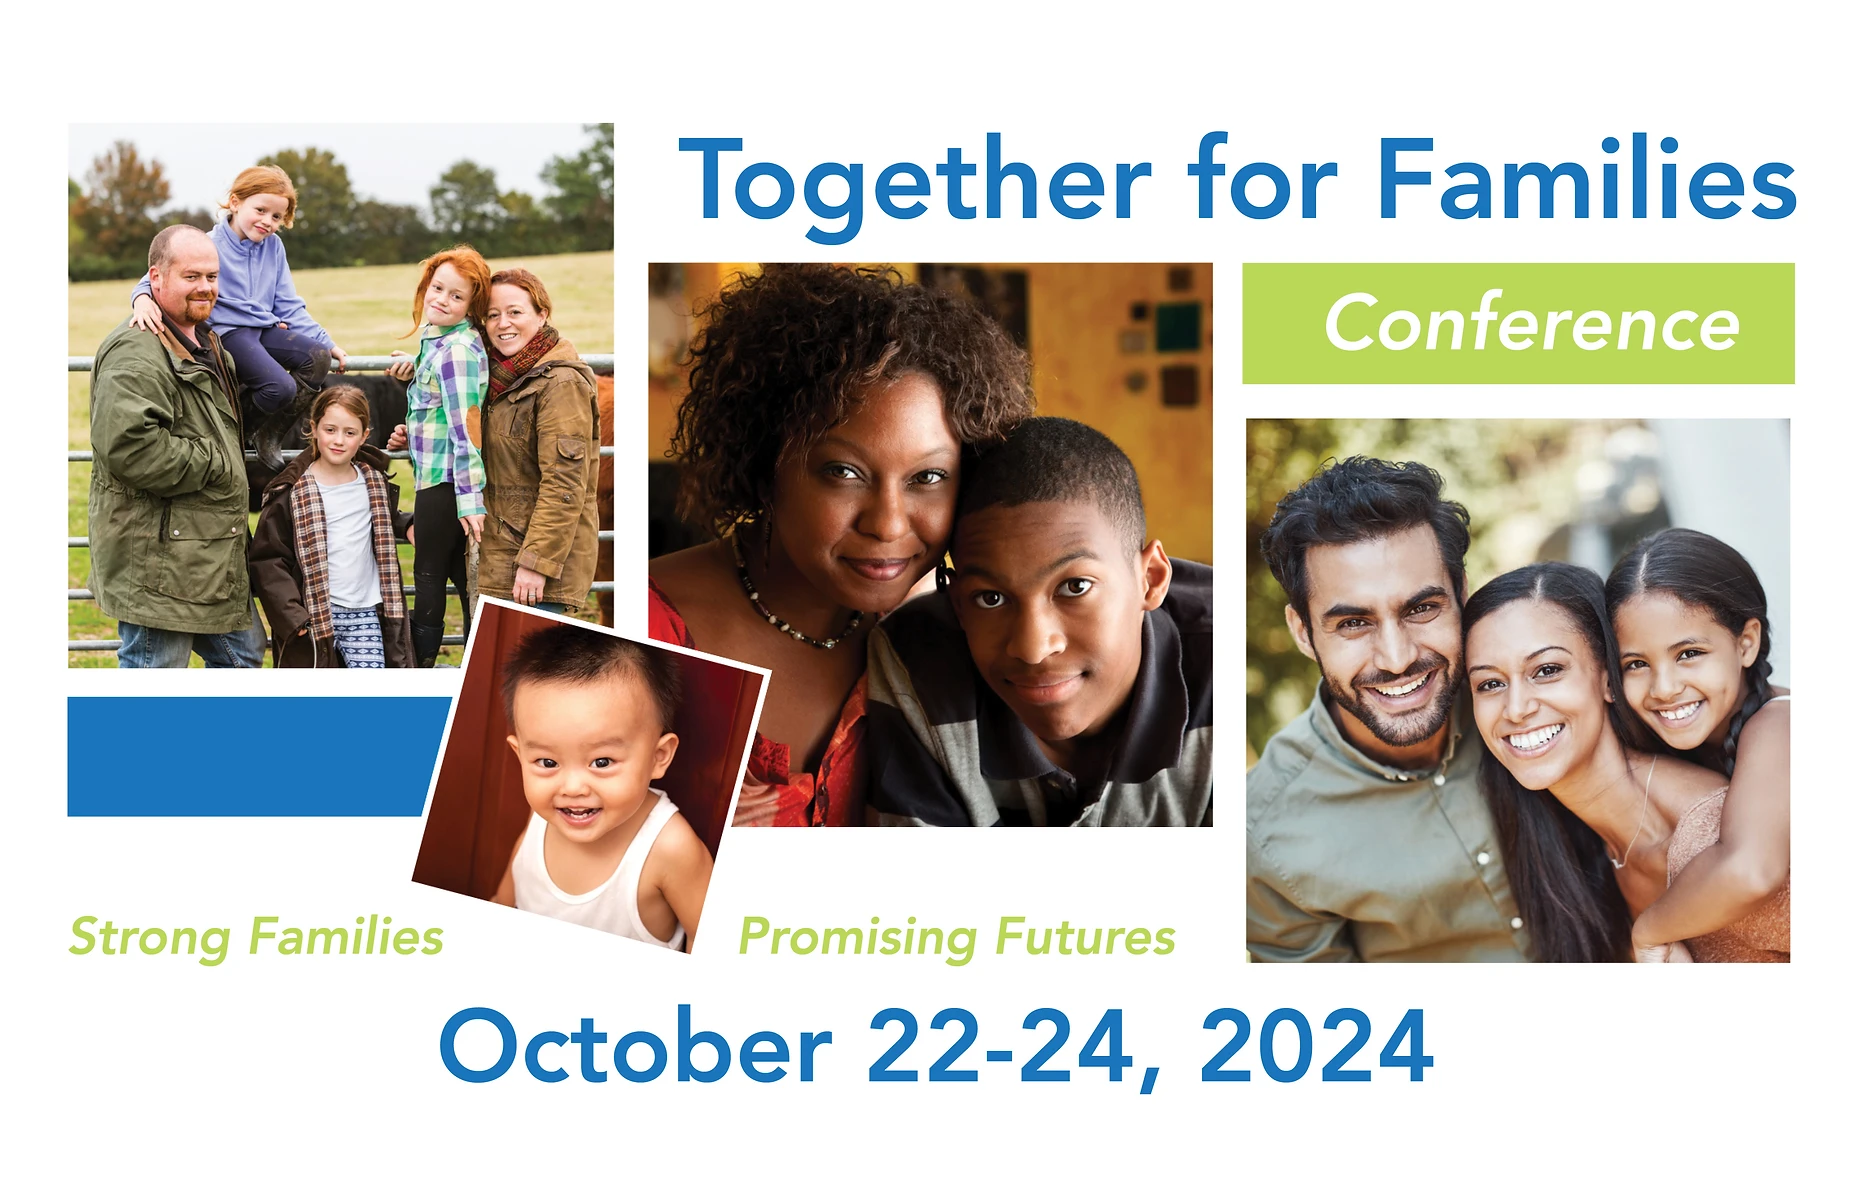 Together for Families Conference